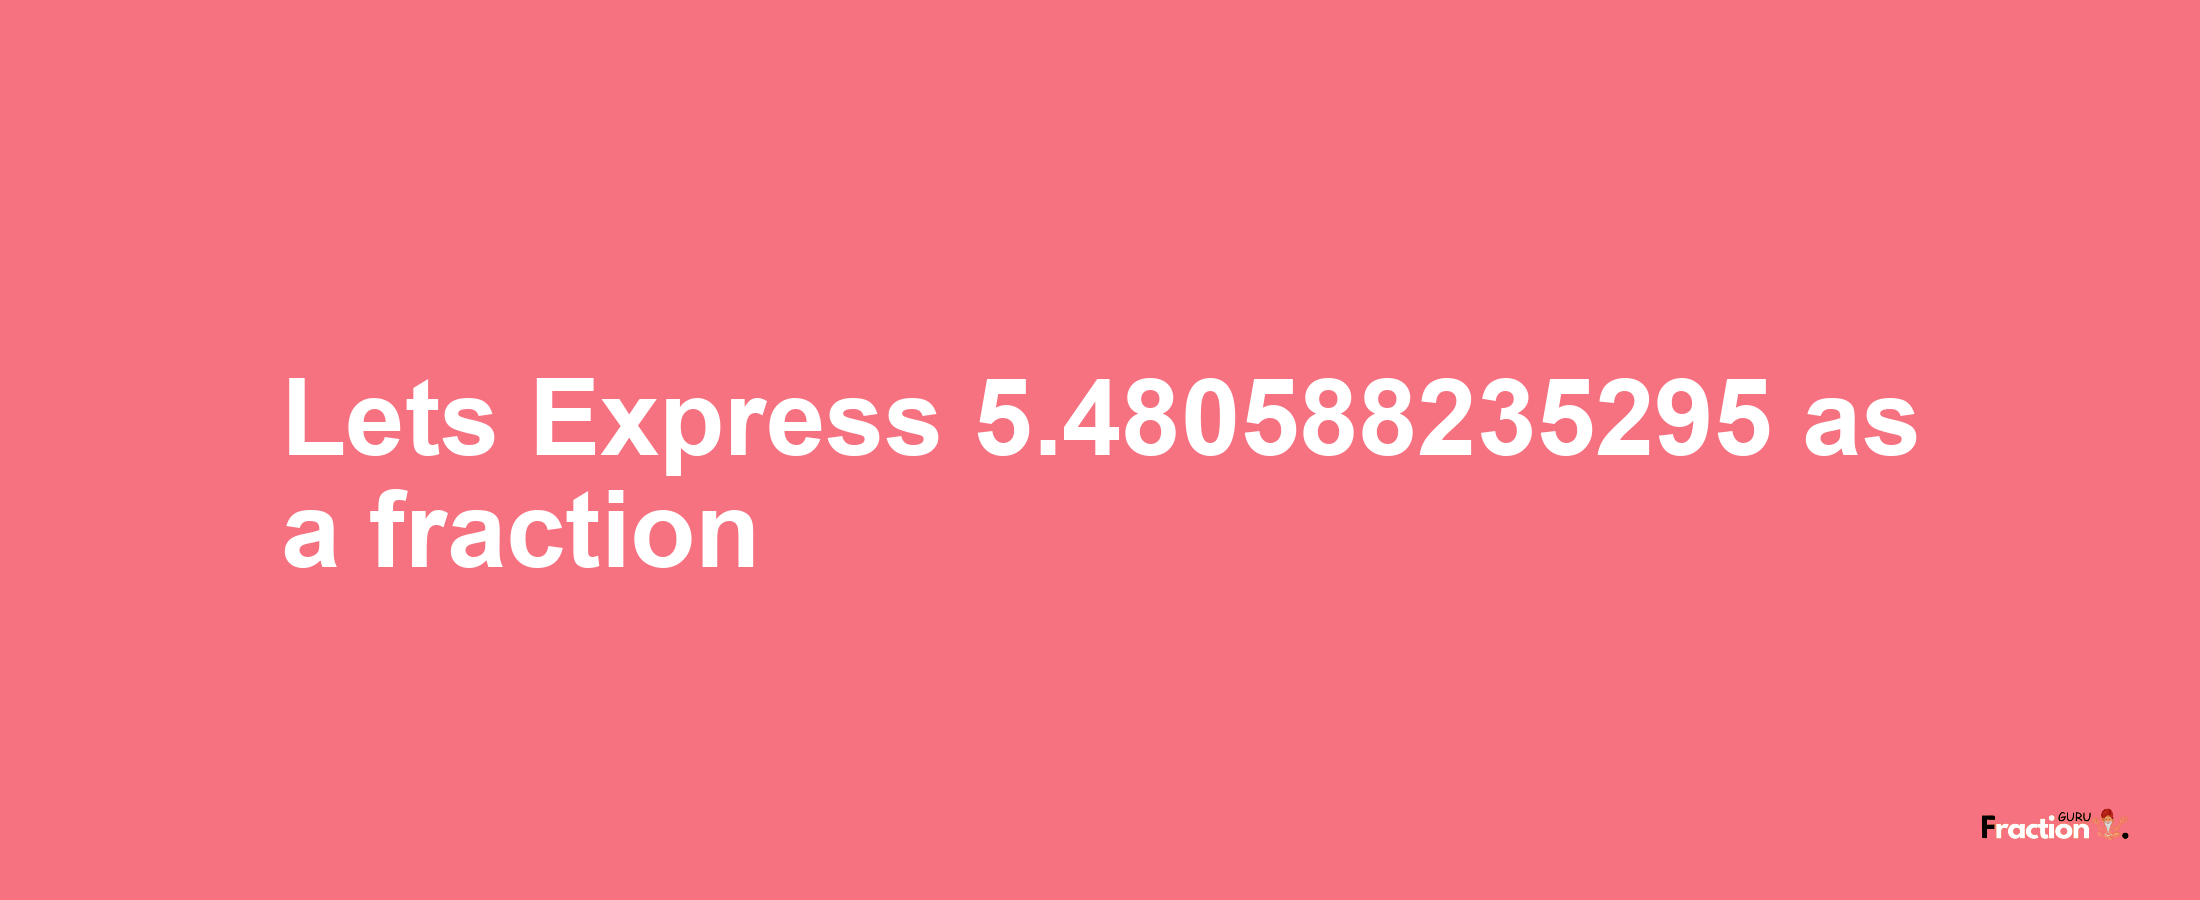 Lets Express 5.480588235295 as afraction